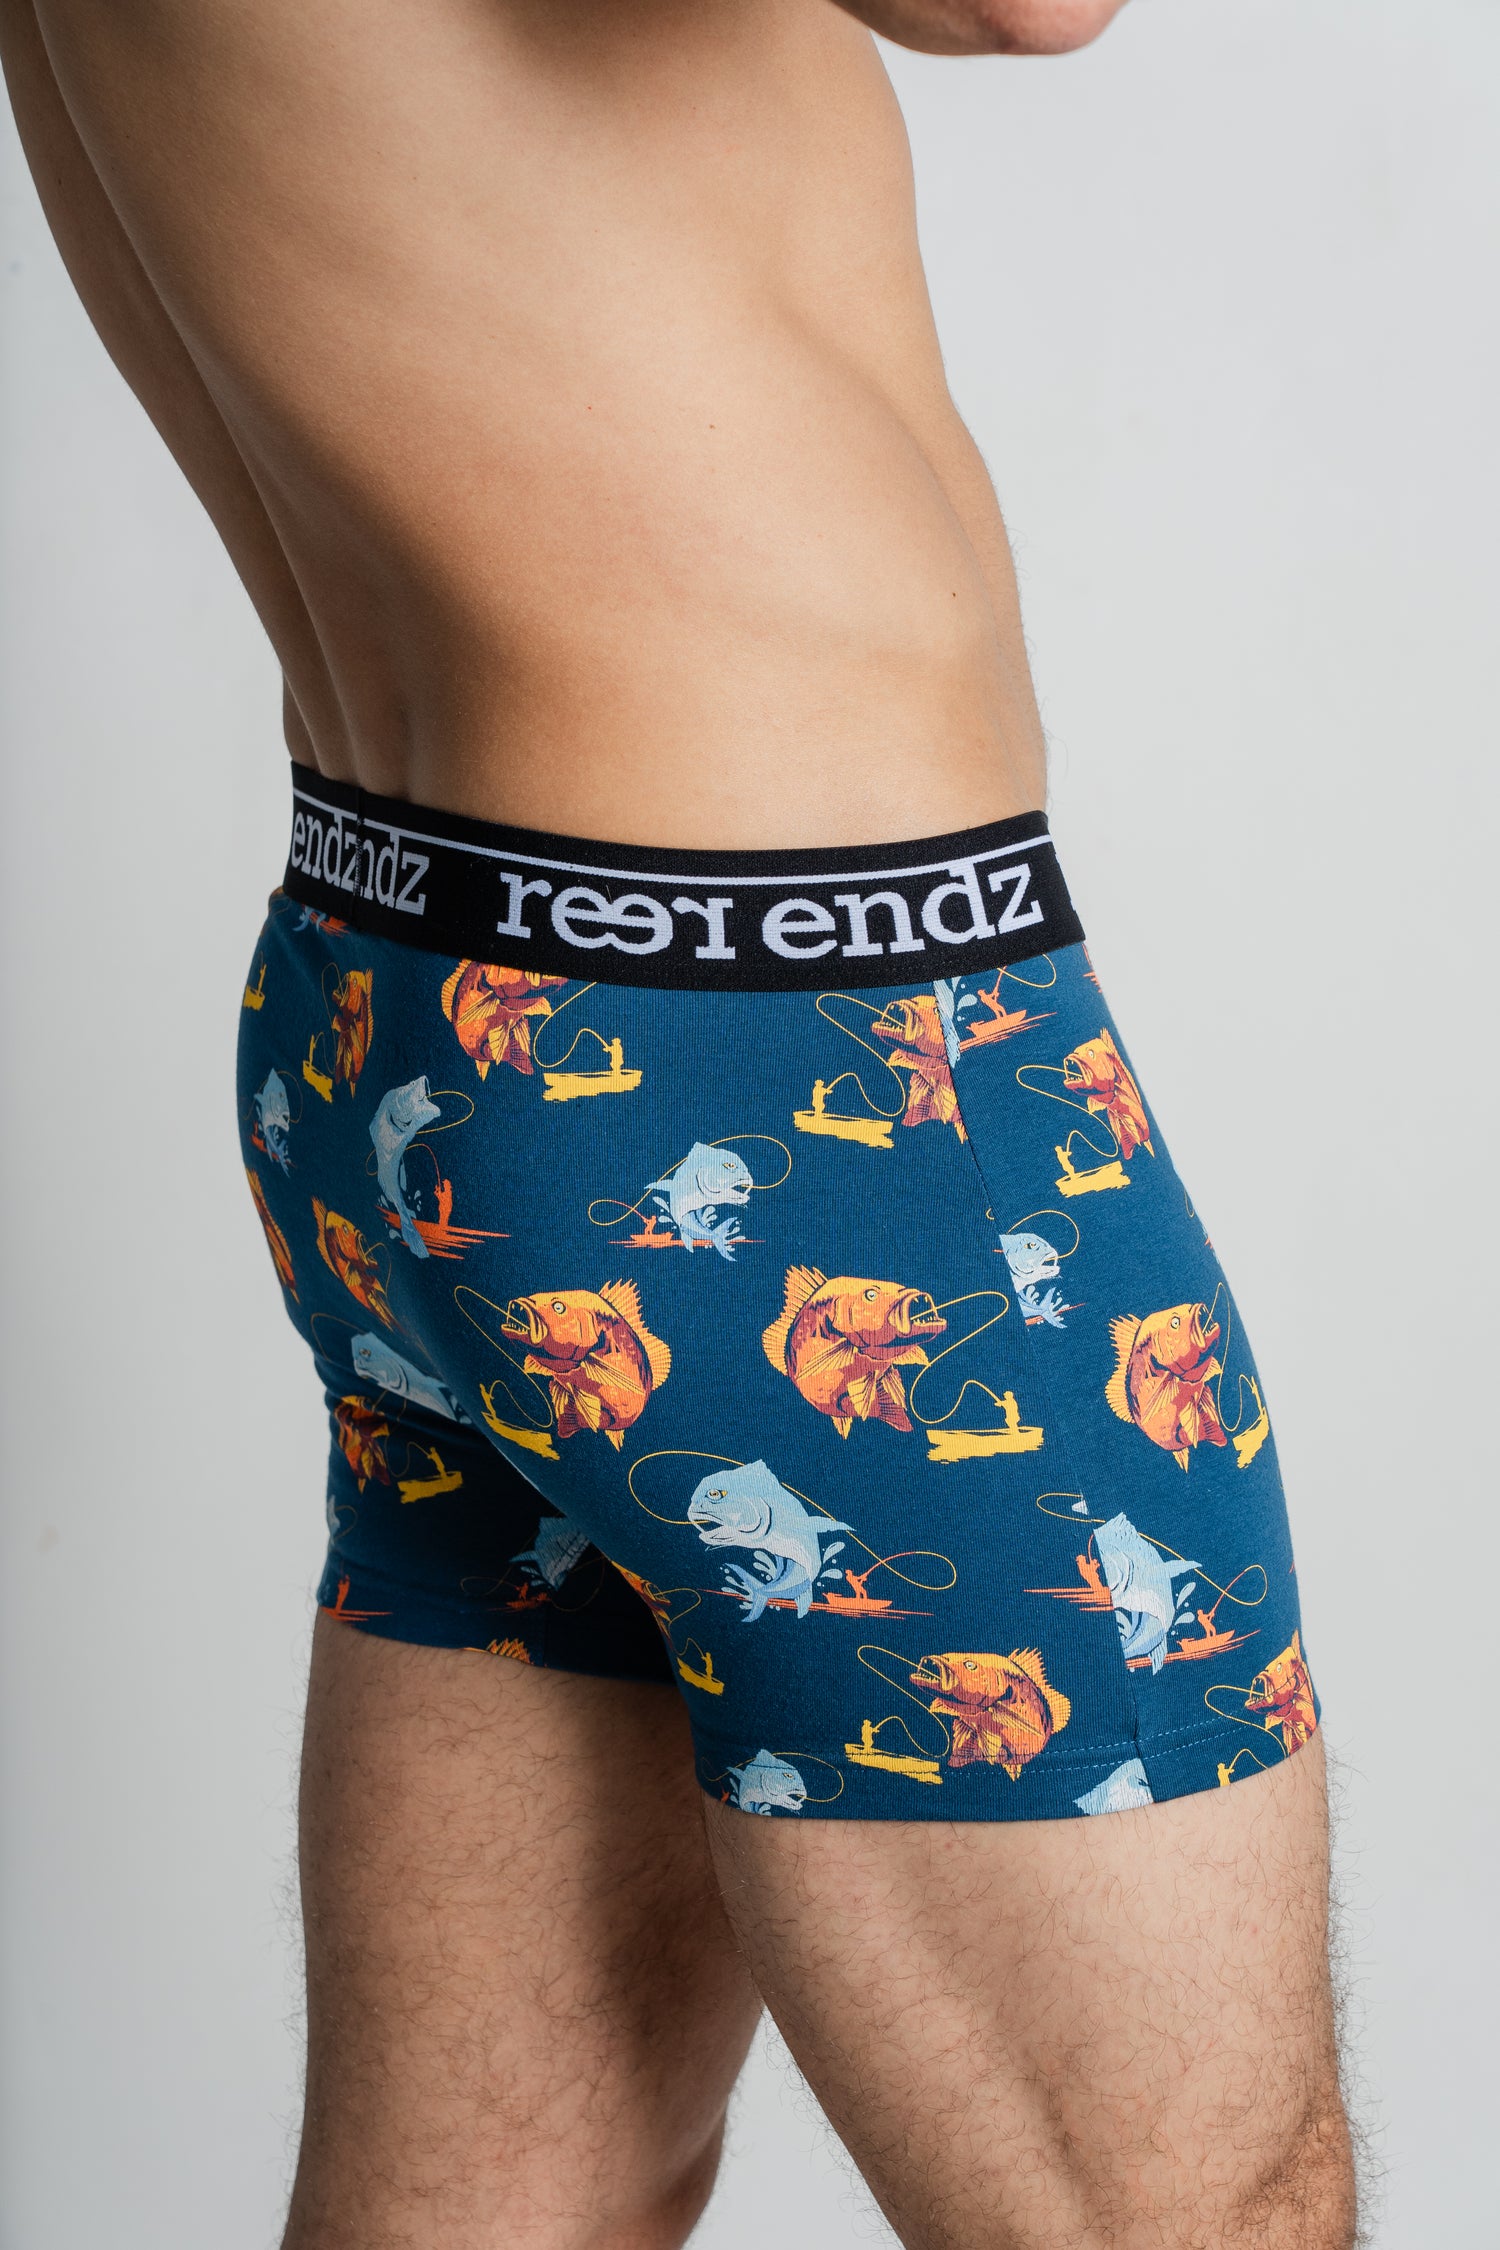 Male model wearing Reer Endz men's trunks, Hooked Print, made from Organic Cotton for exceptional comfort and eco-friendliness.